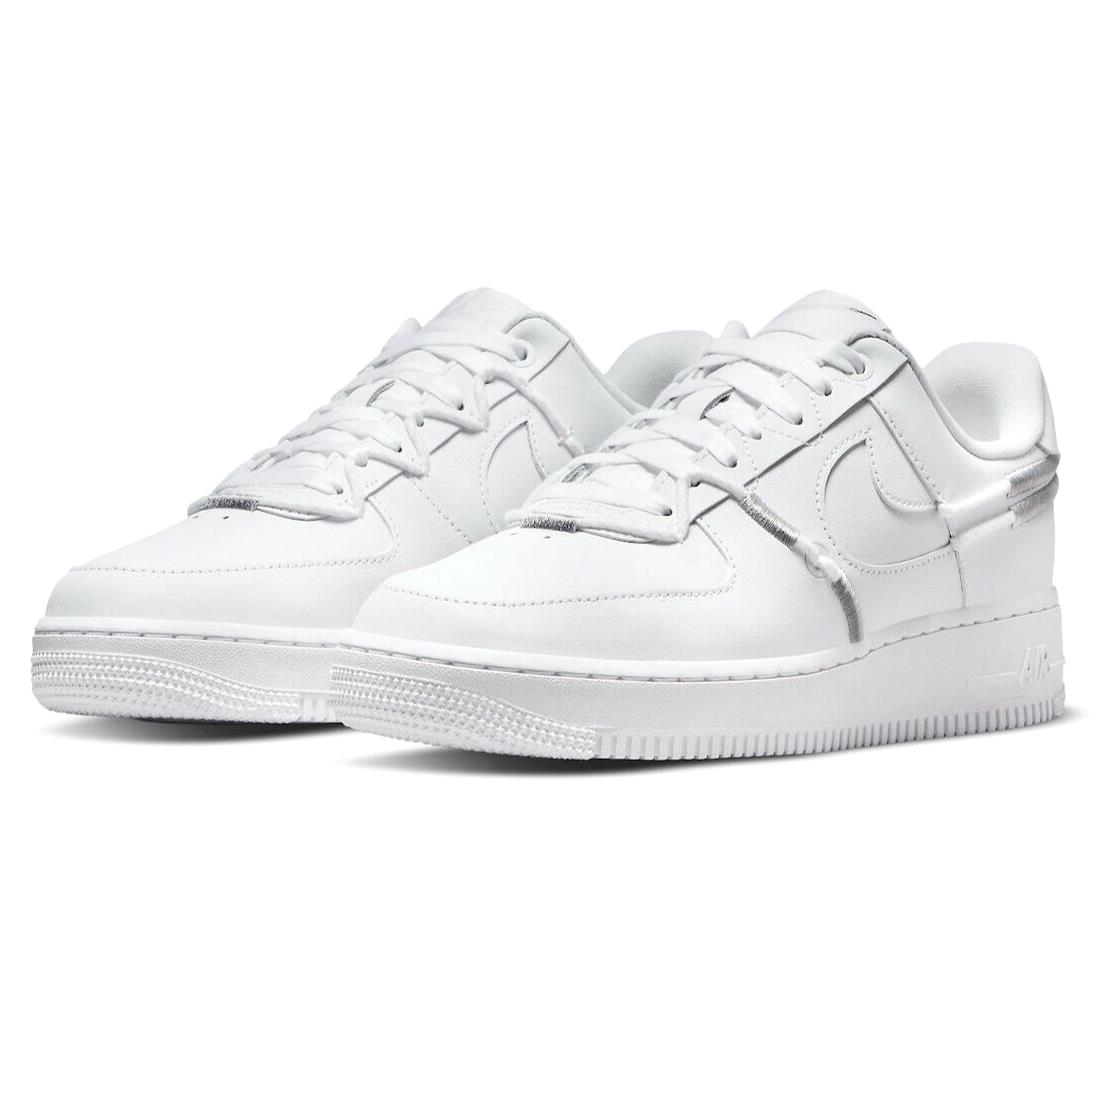 Nike Air Force 1 `07 LX Womens Size 6.5 Sneaker Shoes DH4408 101 White Silver